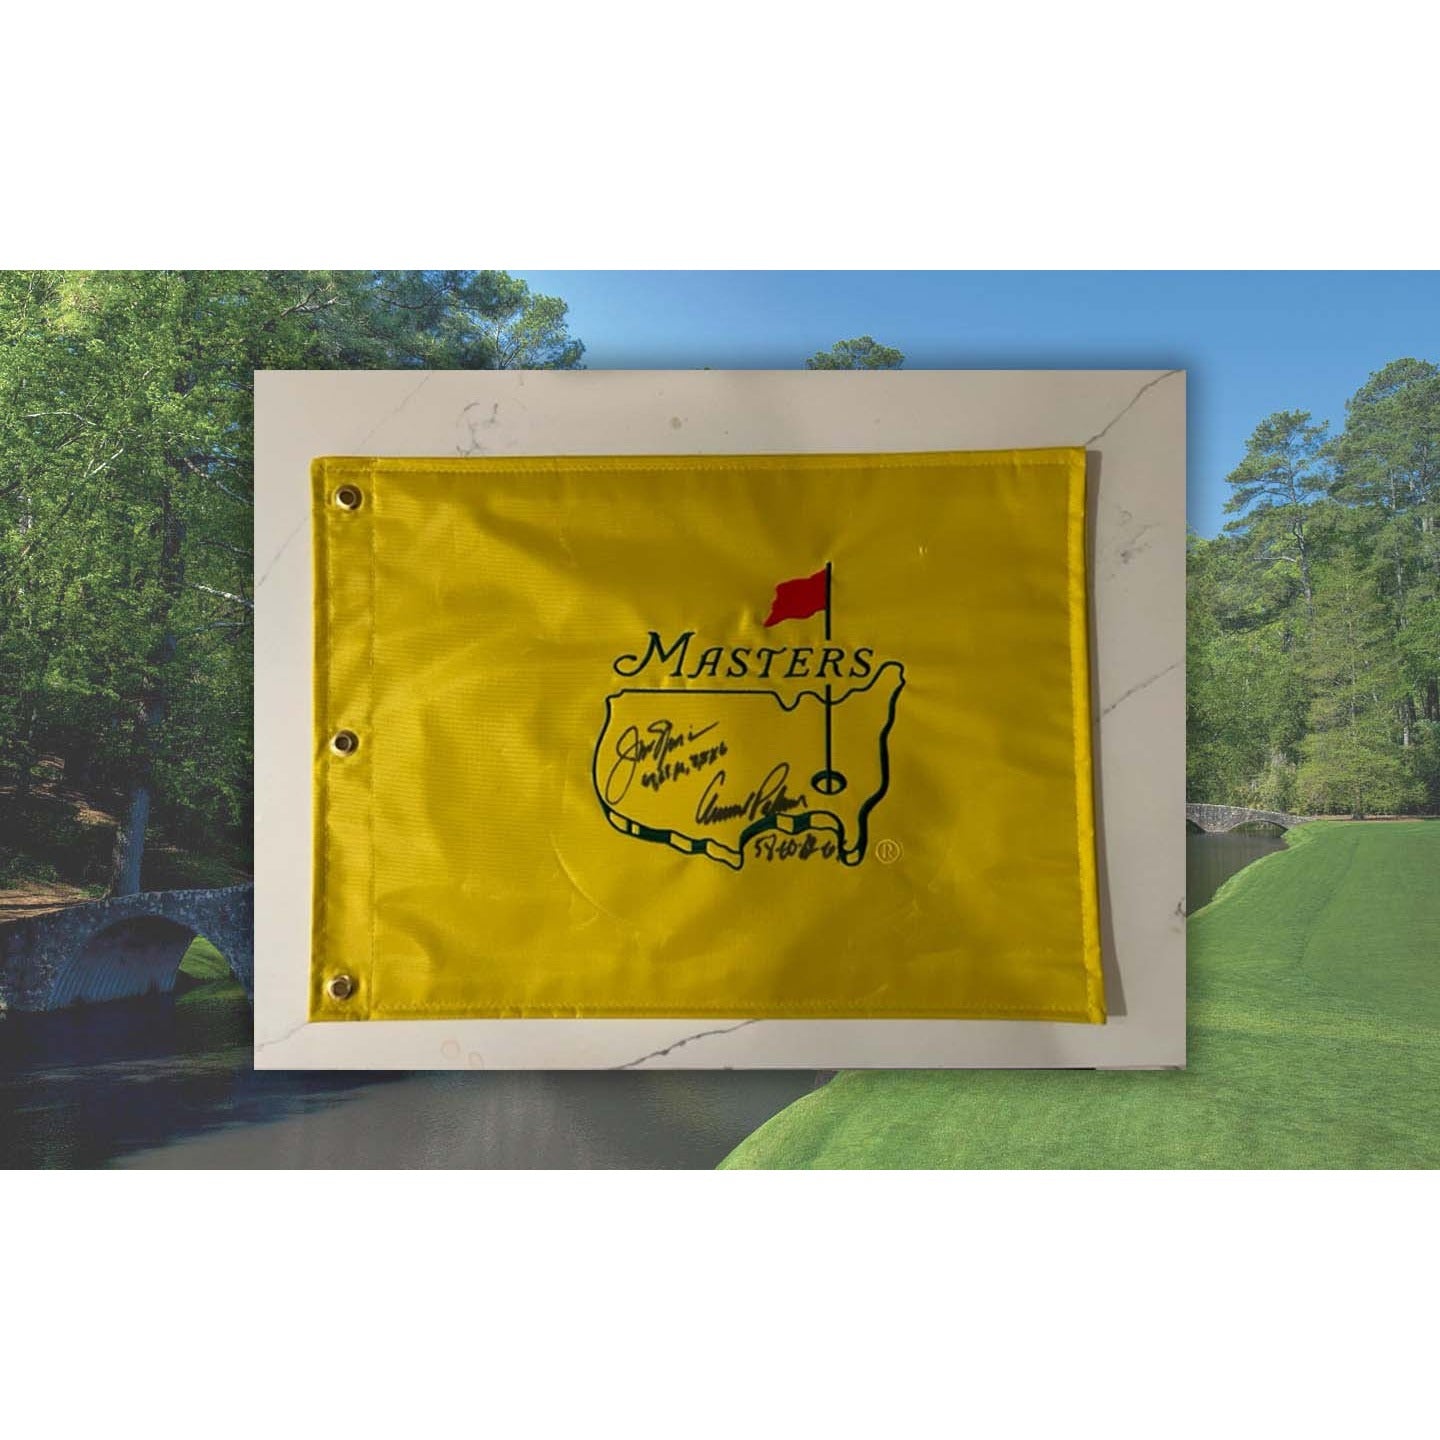 Arnold Palmer and Jack Nicklaus signed and inscribed Masters Golf pin flag with proof